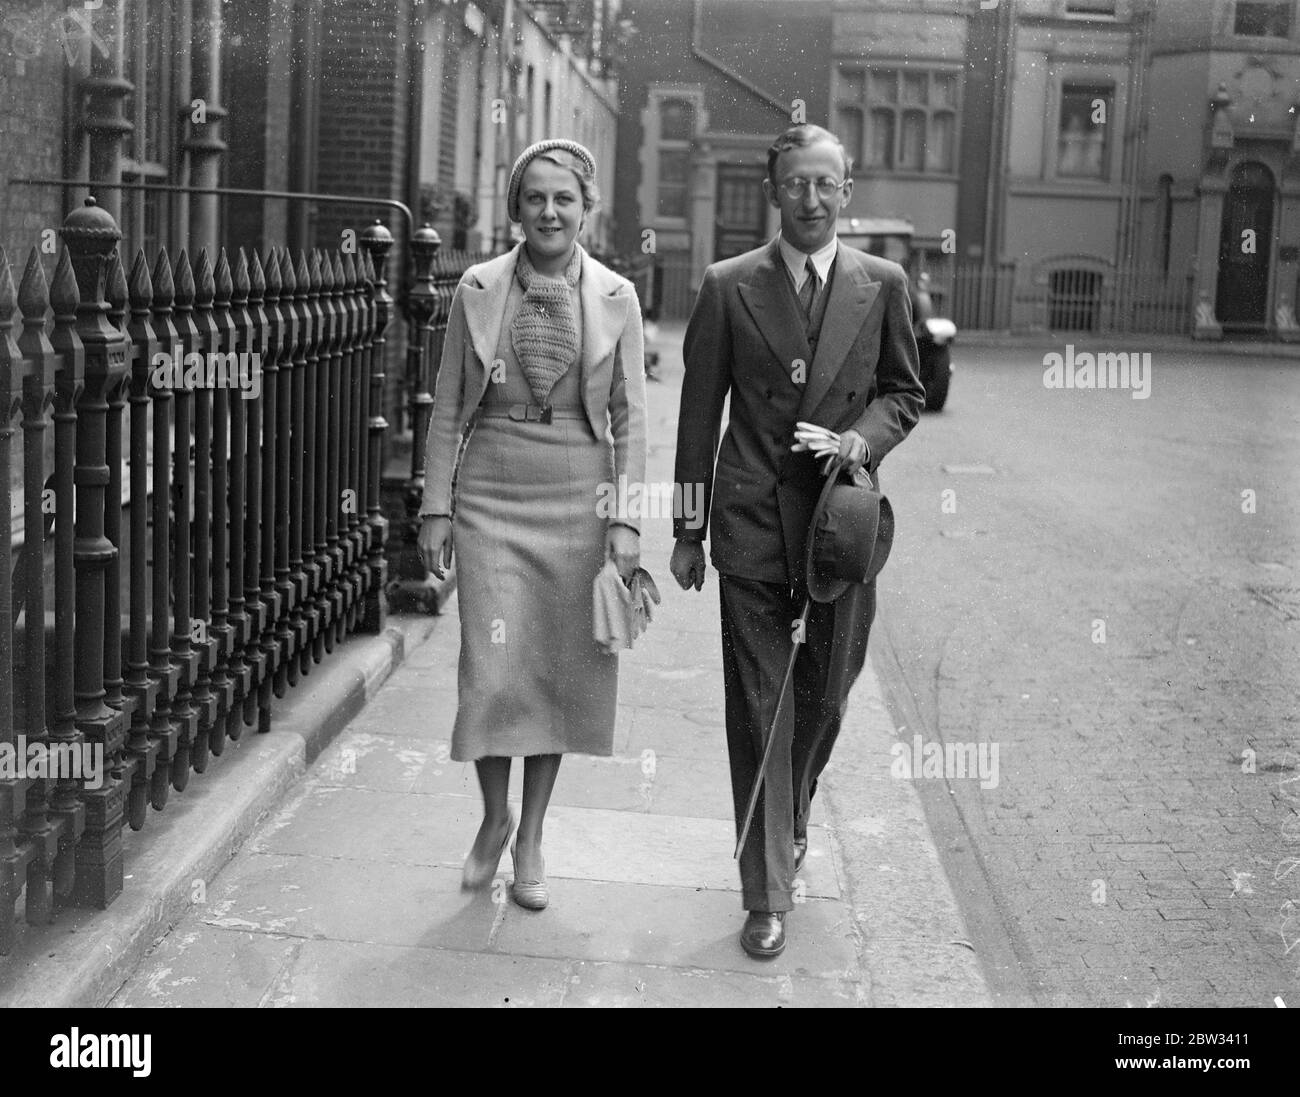 Surprise wedding of Prince and Countess in London . Prince Leopold of Lowenstein Wertheim Freudenberg was married quietly at the Princes row register office in London to the 18 year old Countess Biance von Treuberg of Austria . They will be married at a church in Munich on July 6 . After the wedding they drove to the home of the Prince in Arlington Street , London , where they will stay until their departure to Germany . the Prince and Princess out walking after their wedding in London . 22 June 1932 Stock Photo